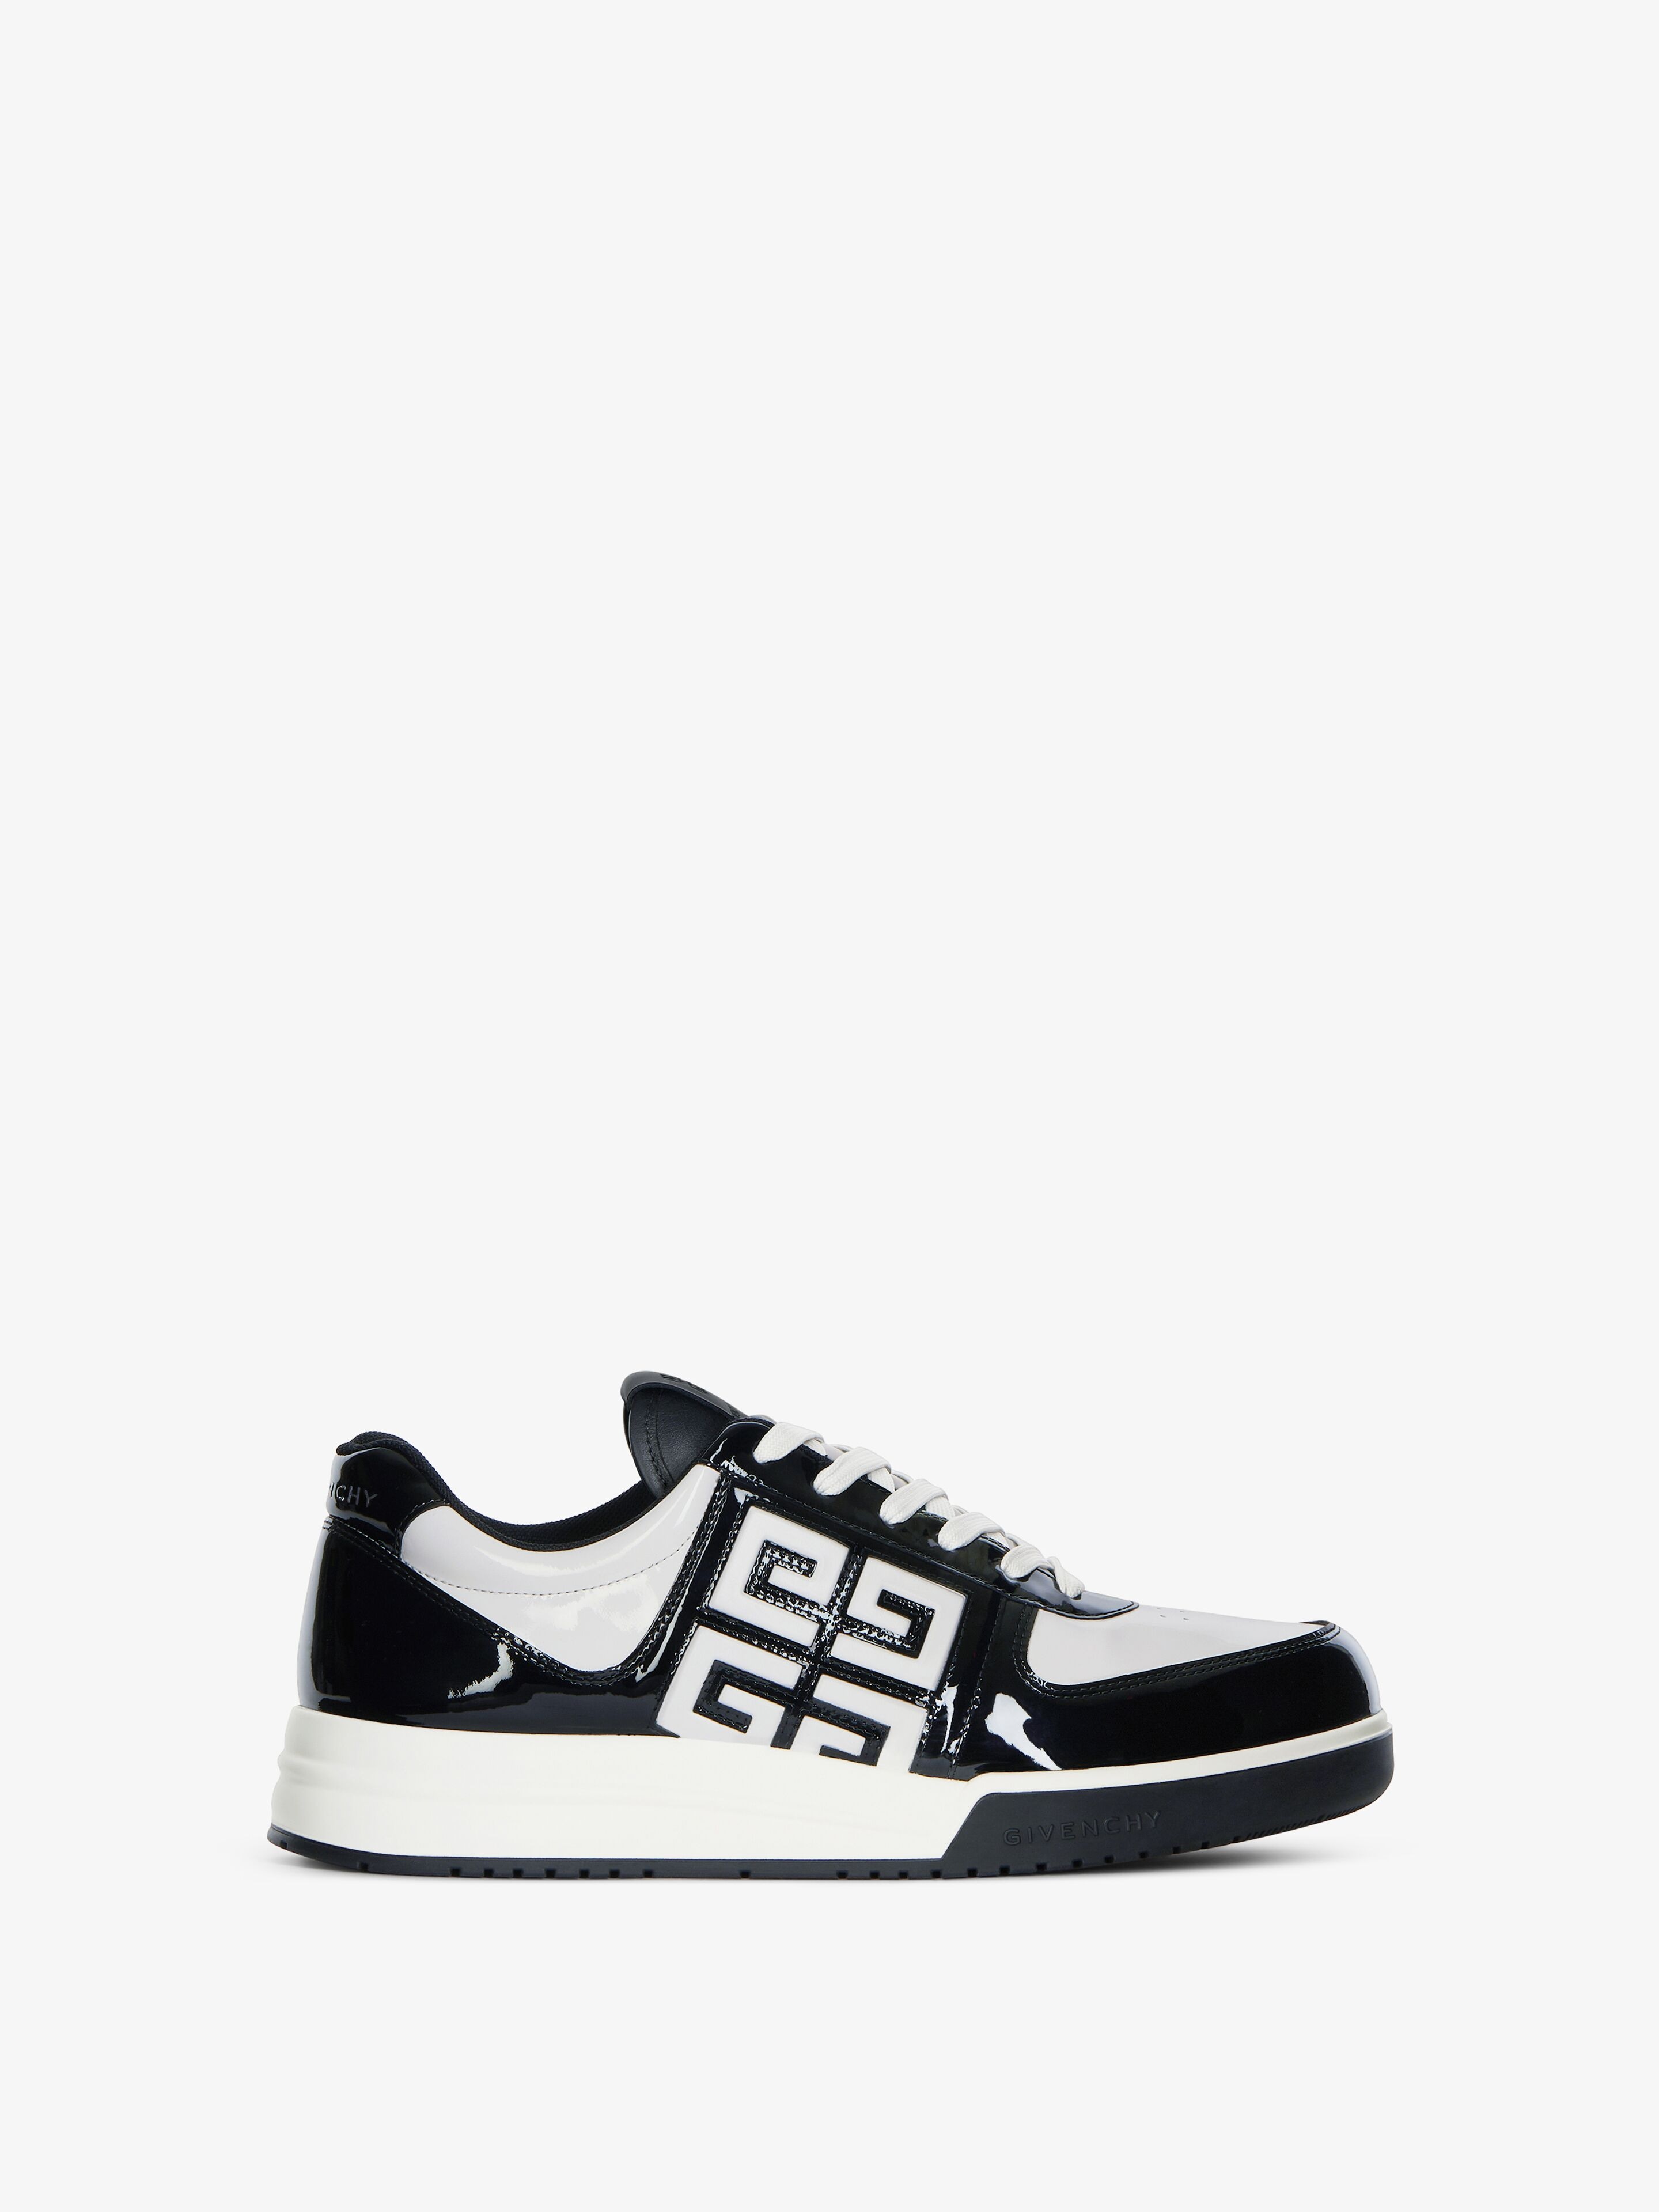 Givenchy G4 Sneakers In Patent Leather In Black/white